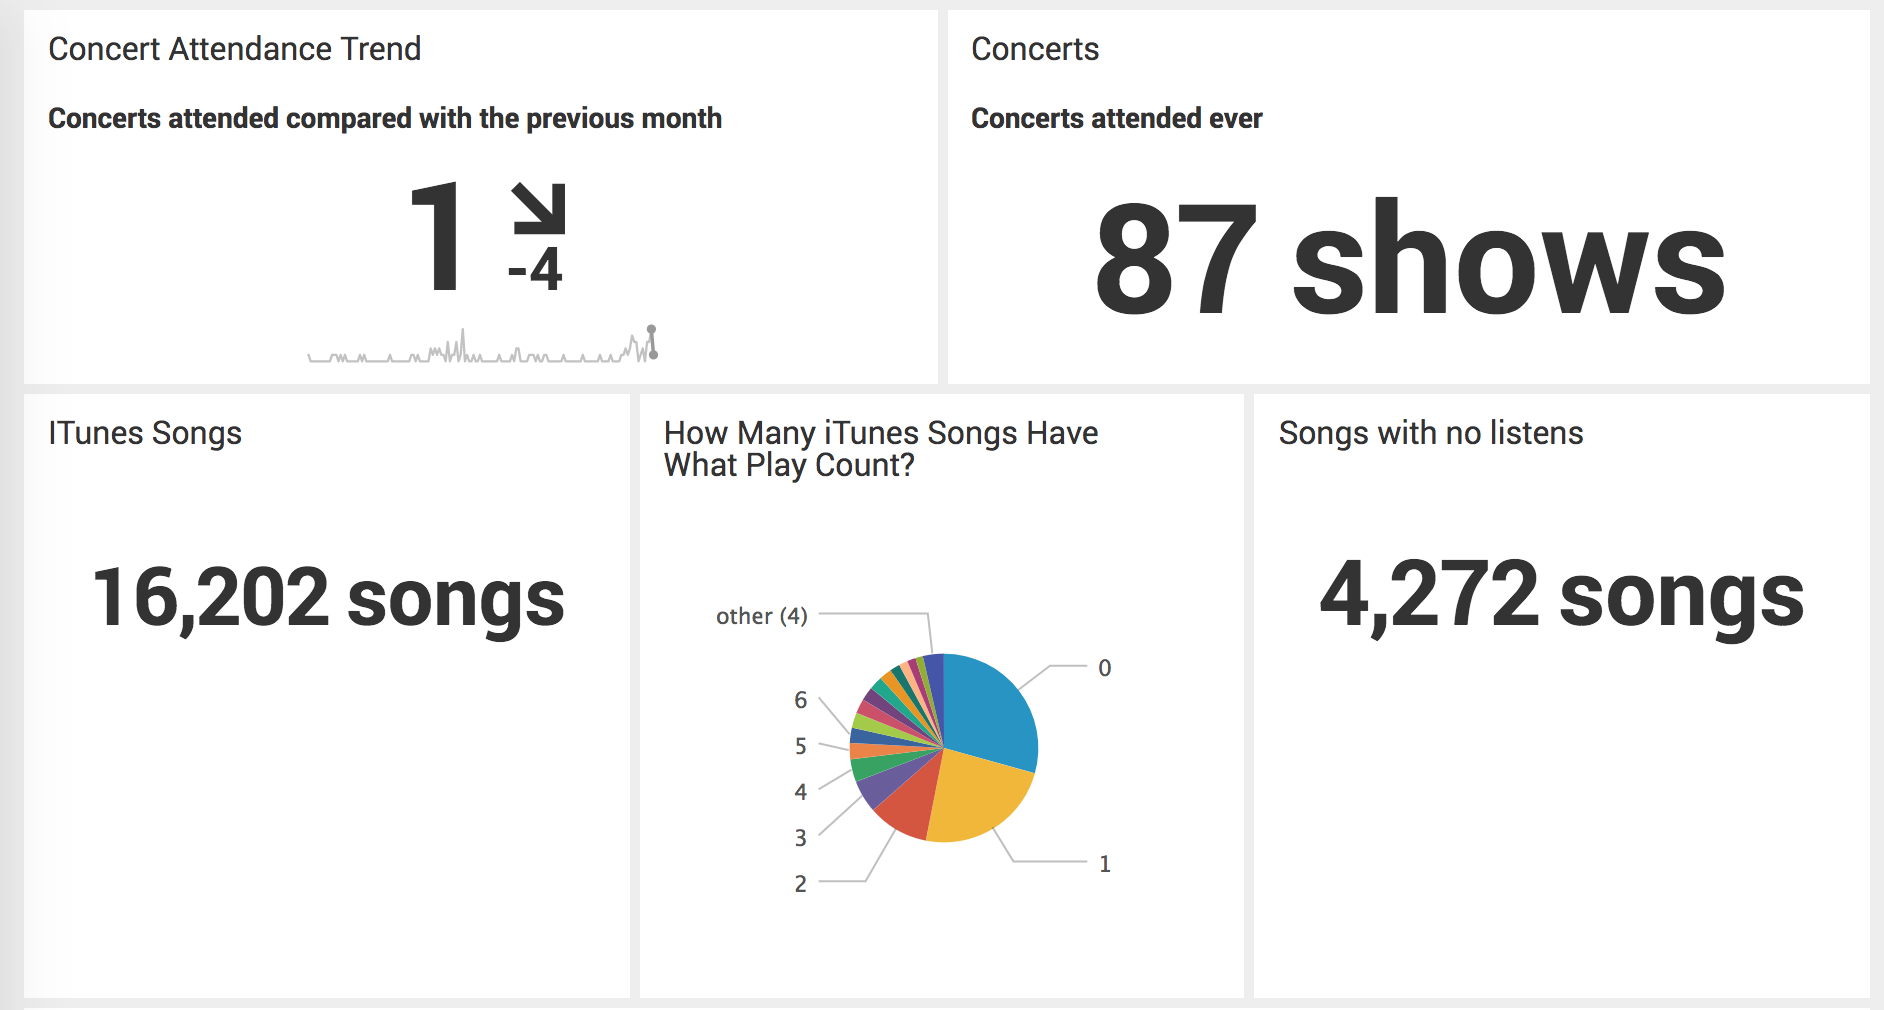 Screen image showing 5 dashboard panels. Clockwise, the upper left shows a trending indicator of concerts attended per month, displaying 1 for the month of December and a net decrease of 4 from the previous month. The next shows the overall number of concerts attended, 87 shows. The next shows the number of iTunes library songs with no listens: 4272. The second to last shows a pie chart showing that nearly 30% of the songs have 0 listens, 23% have 1 listen, and the rest are a variety of listen counts. The last indicator shows the total number of songs in my iTunes library, or 16202.